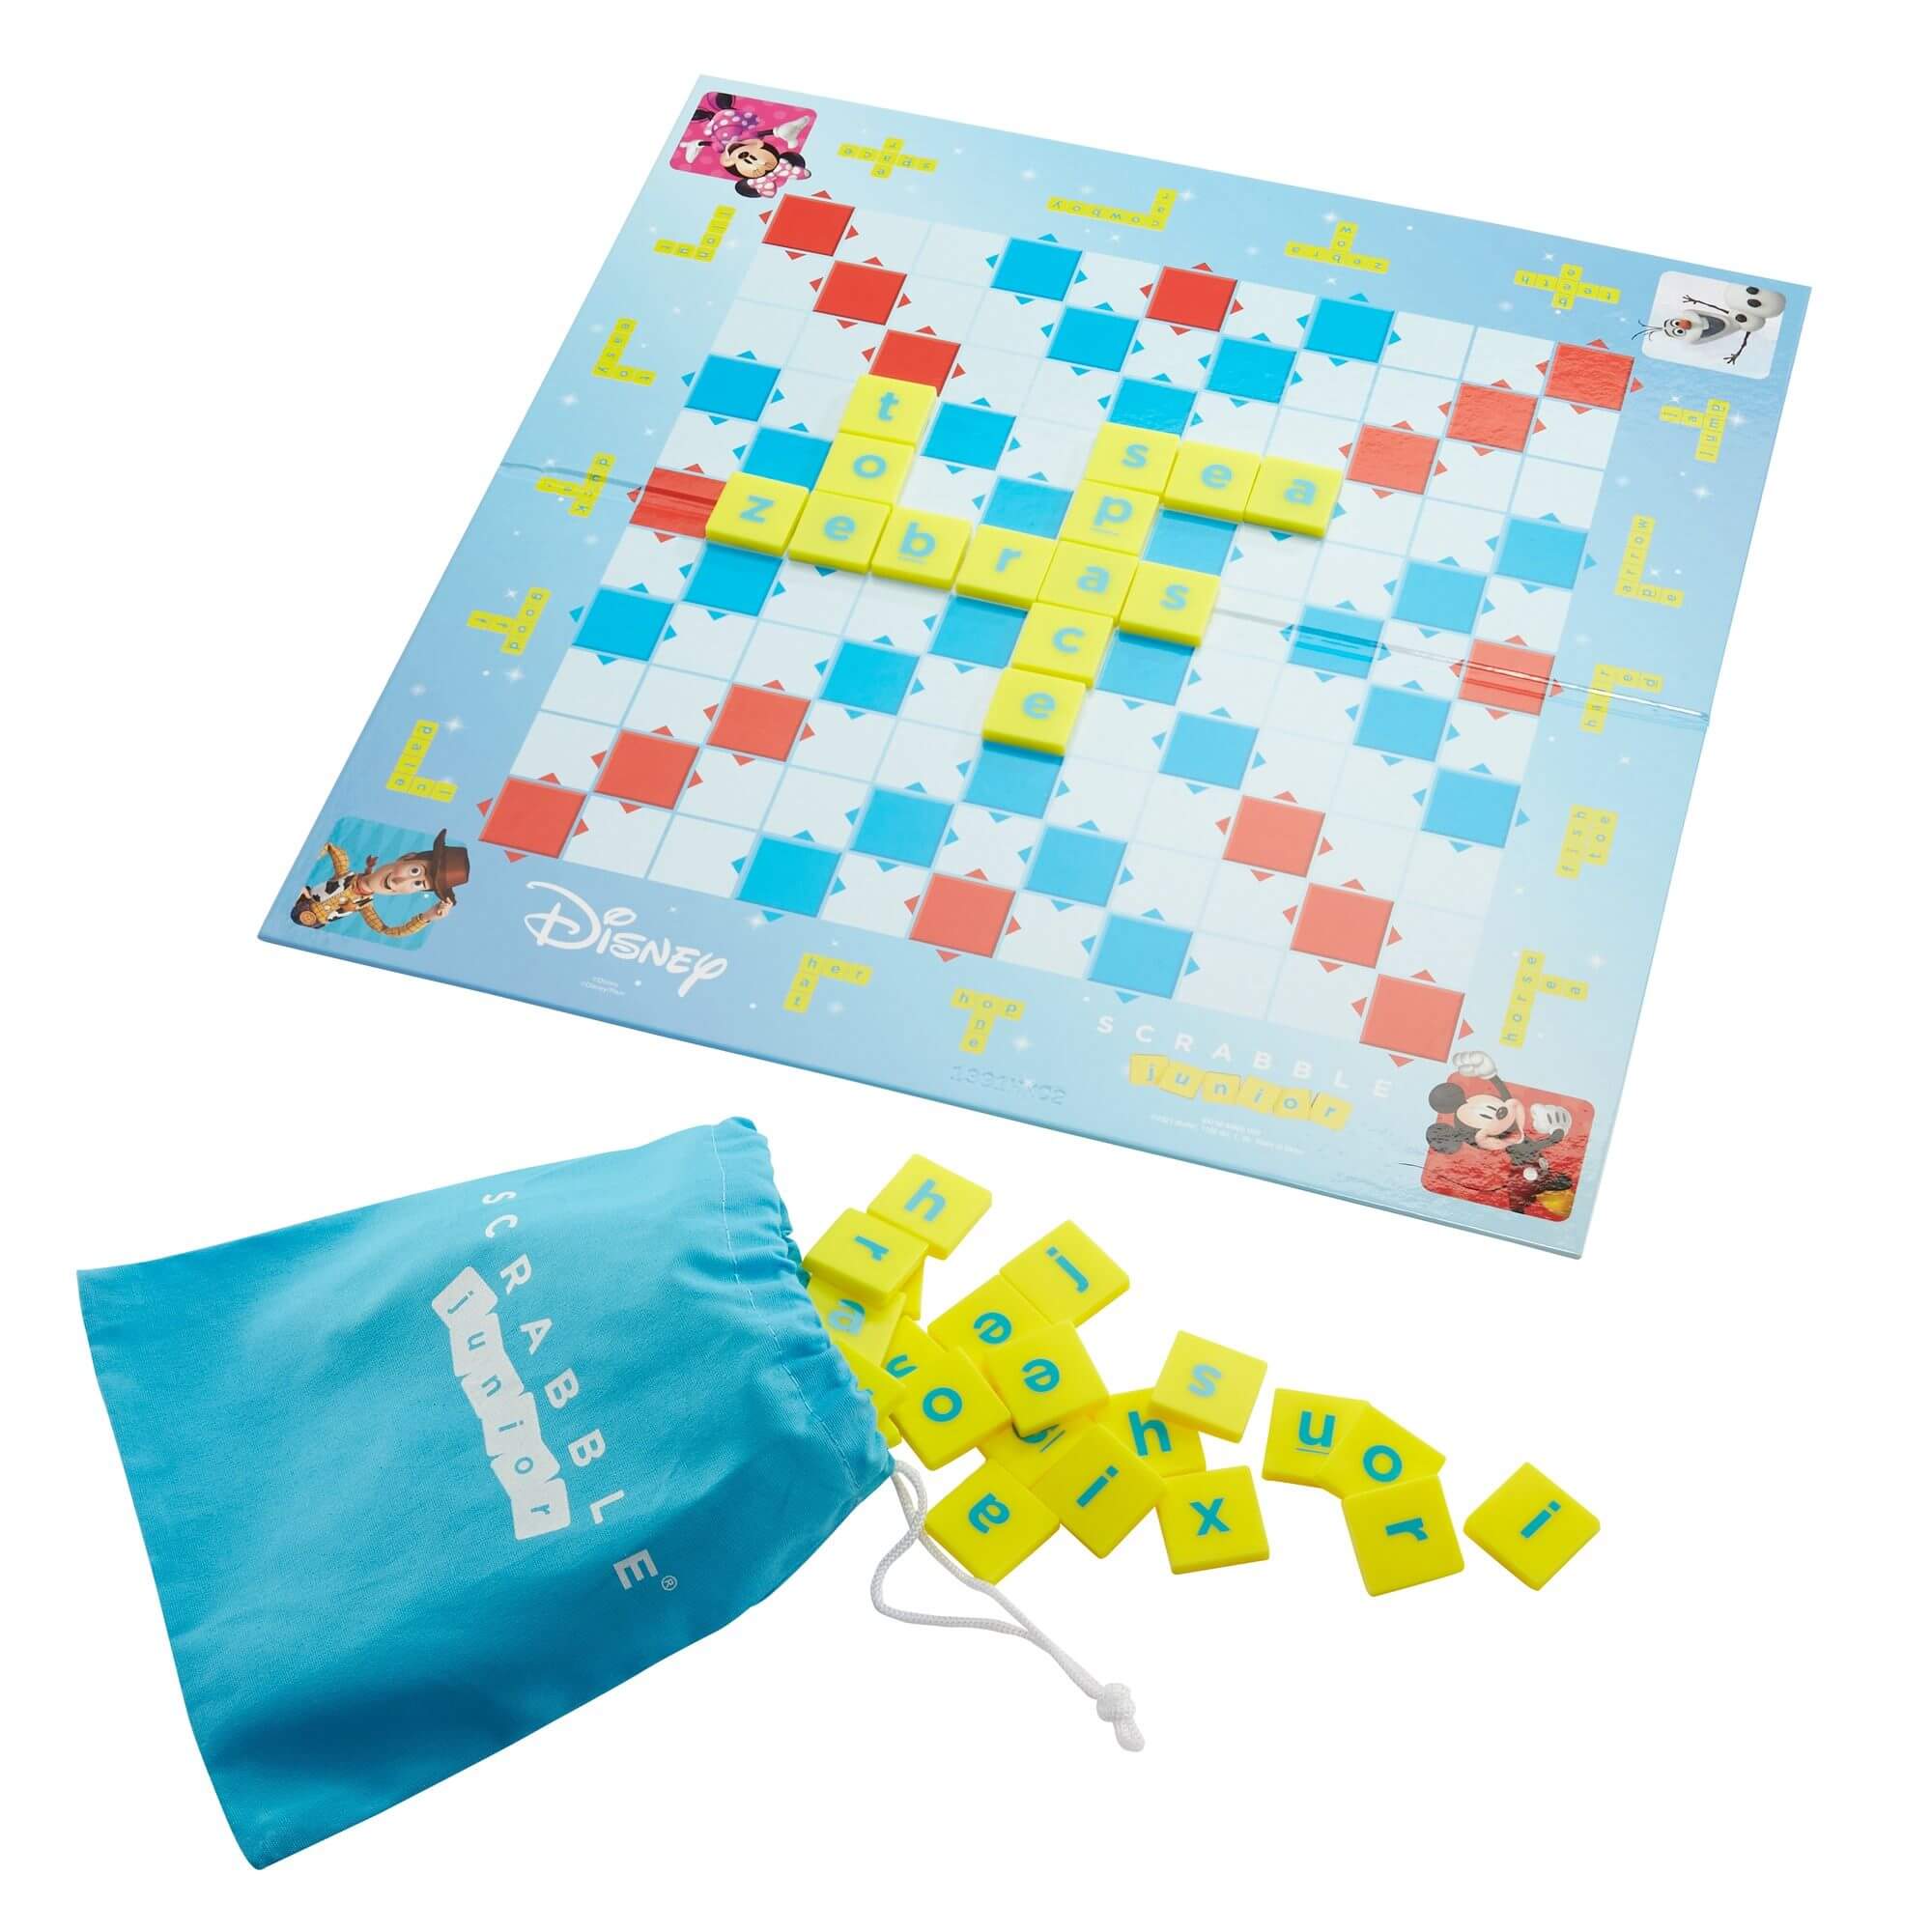 Junior Scrabble - Disney characters edition - board games for fun and learning for kids